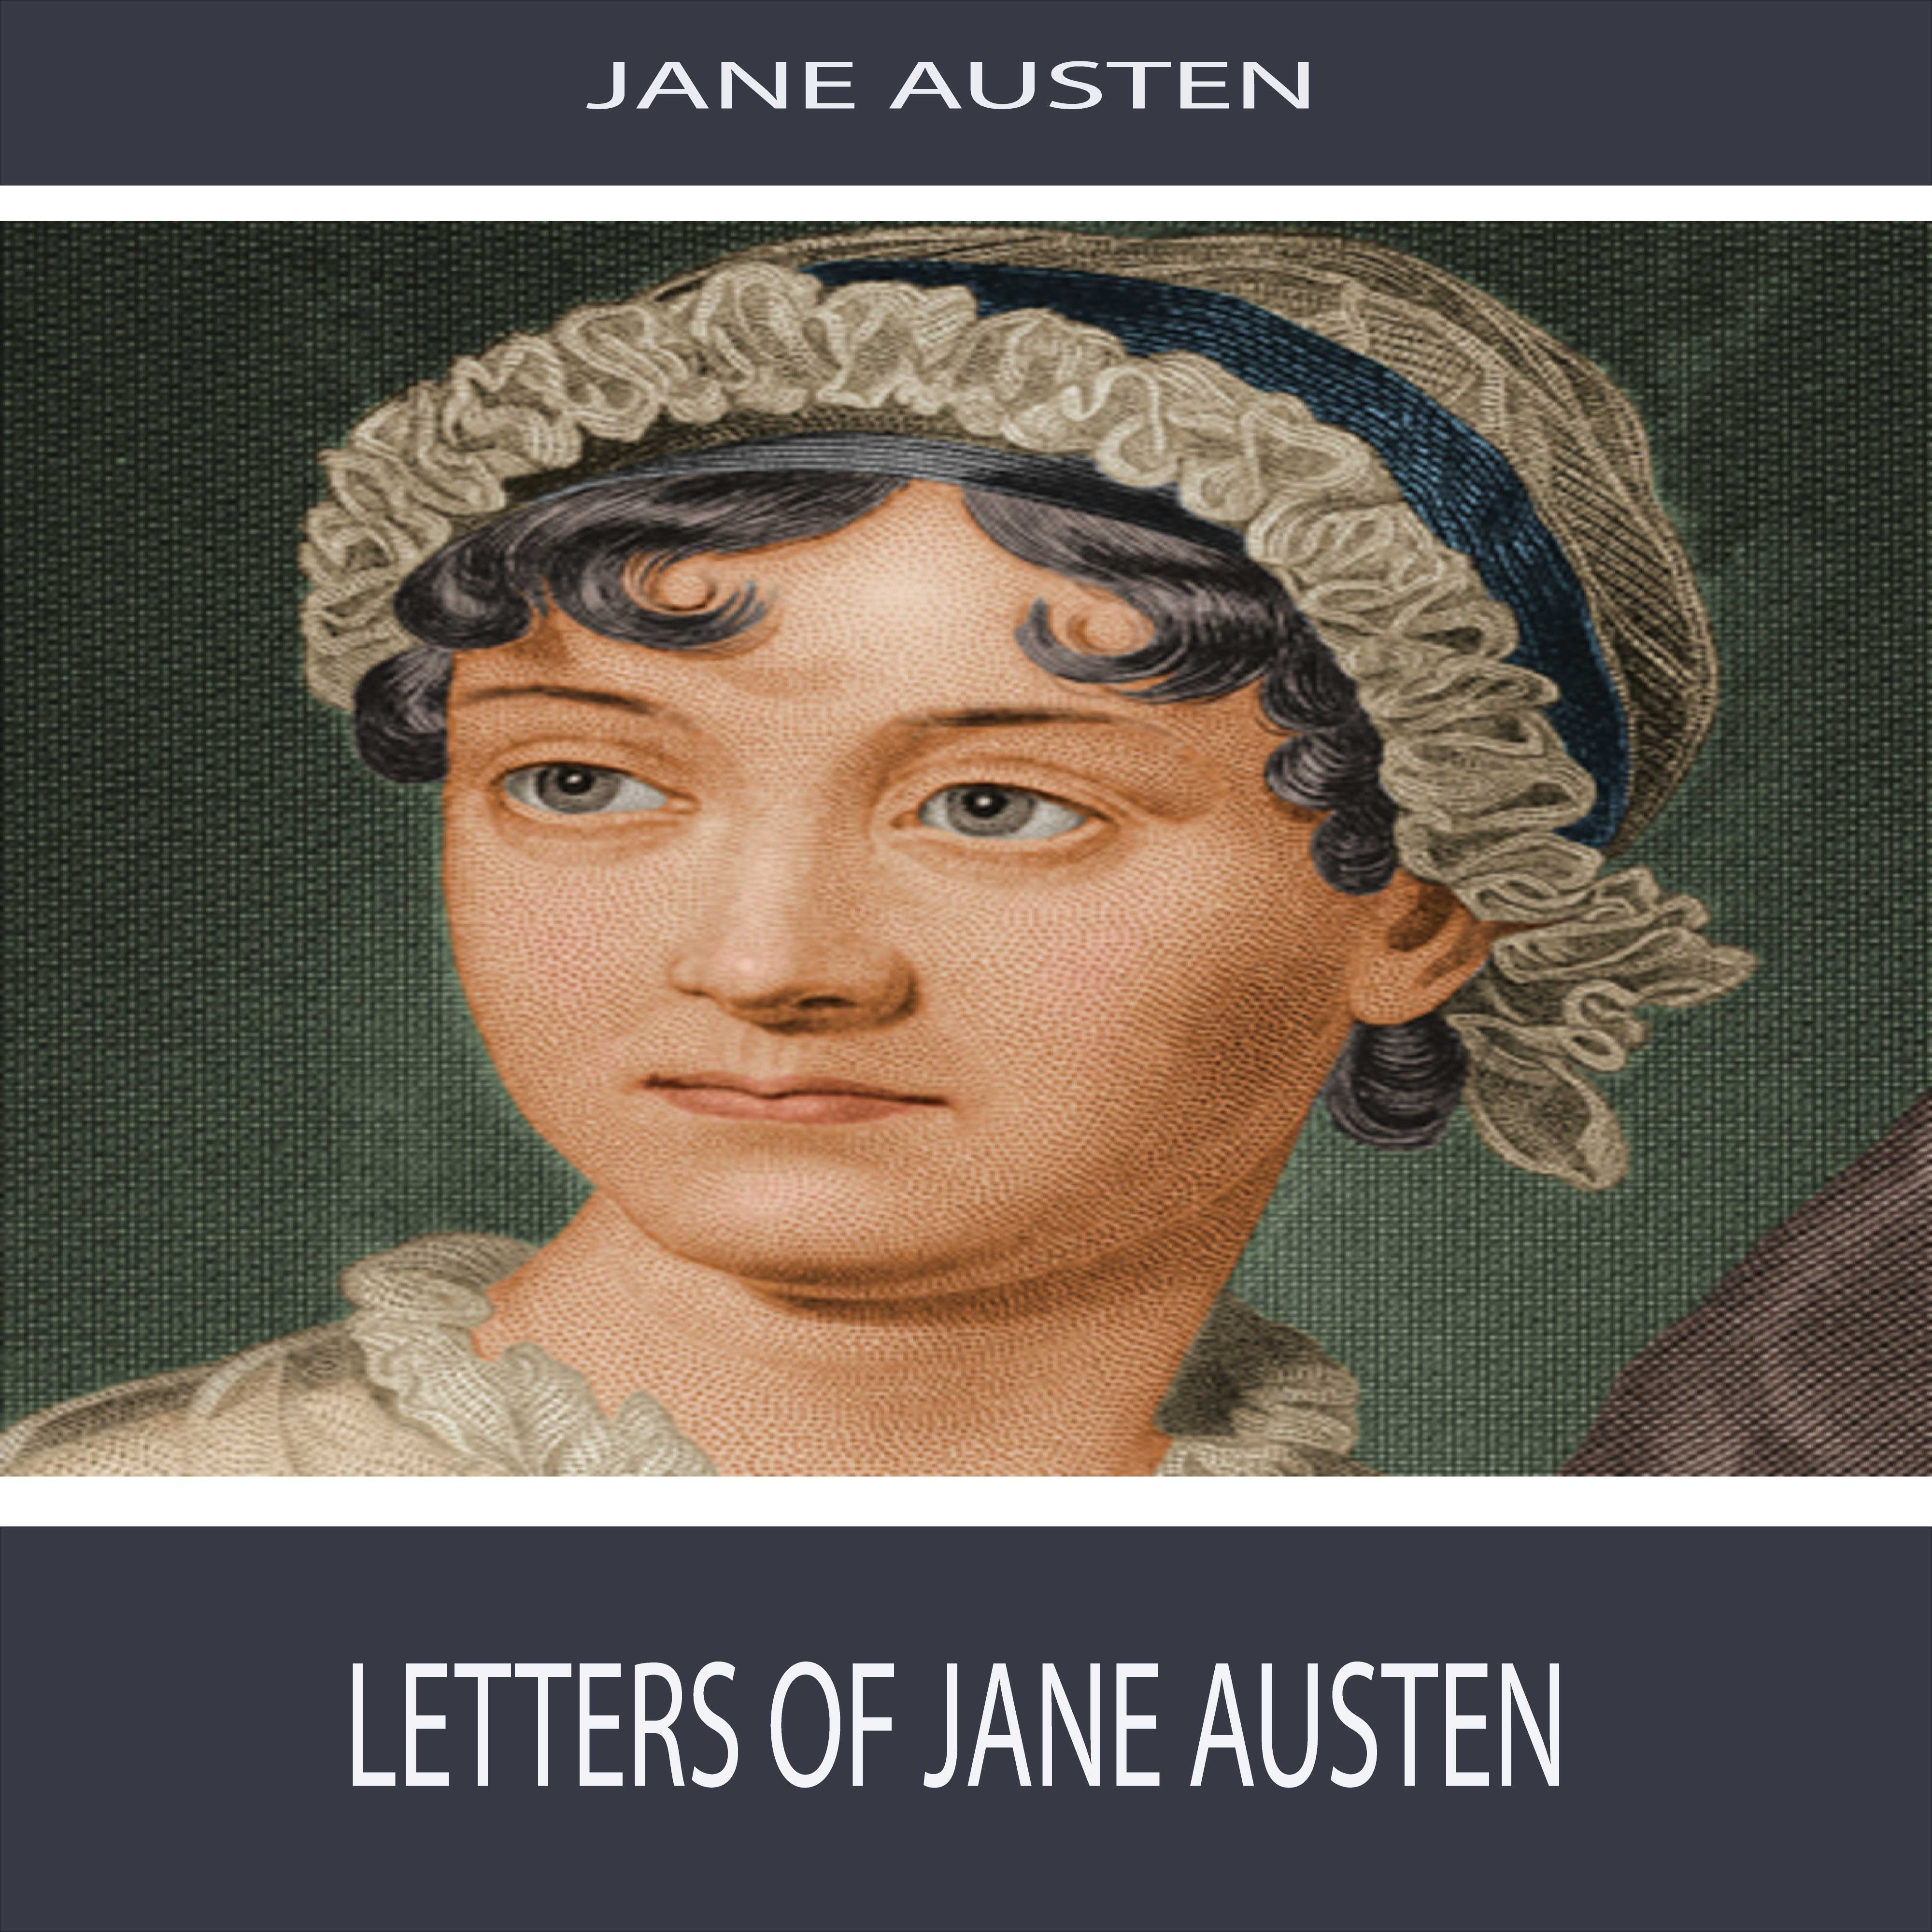 Letters of Jane Austen: Section 19